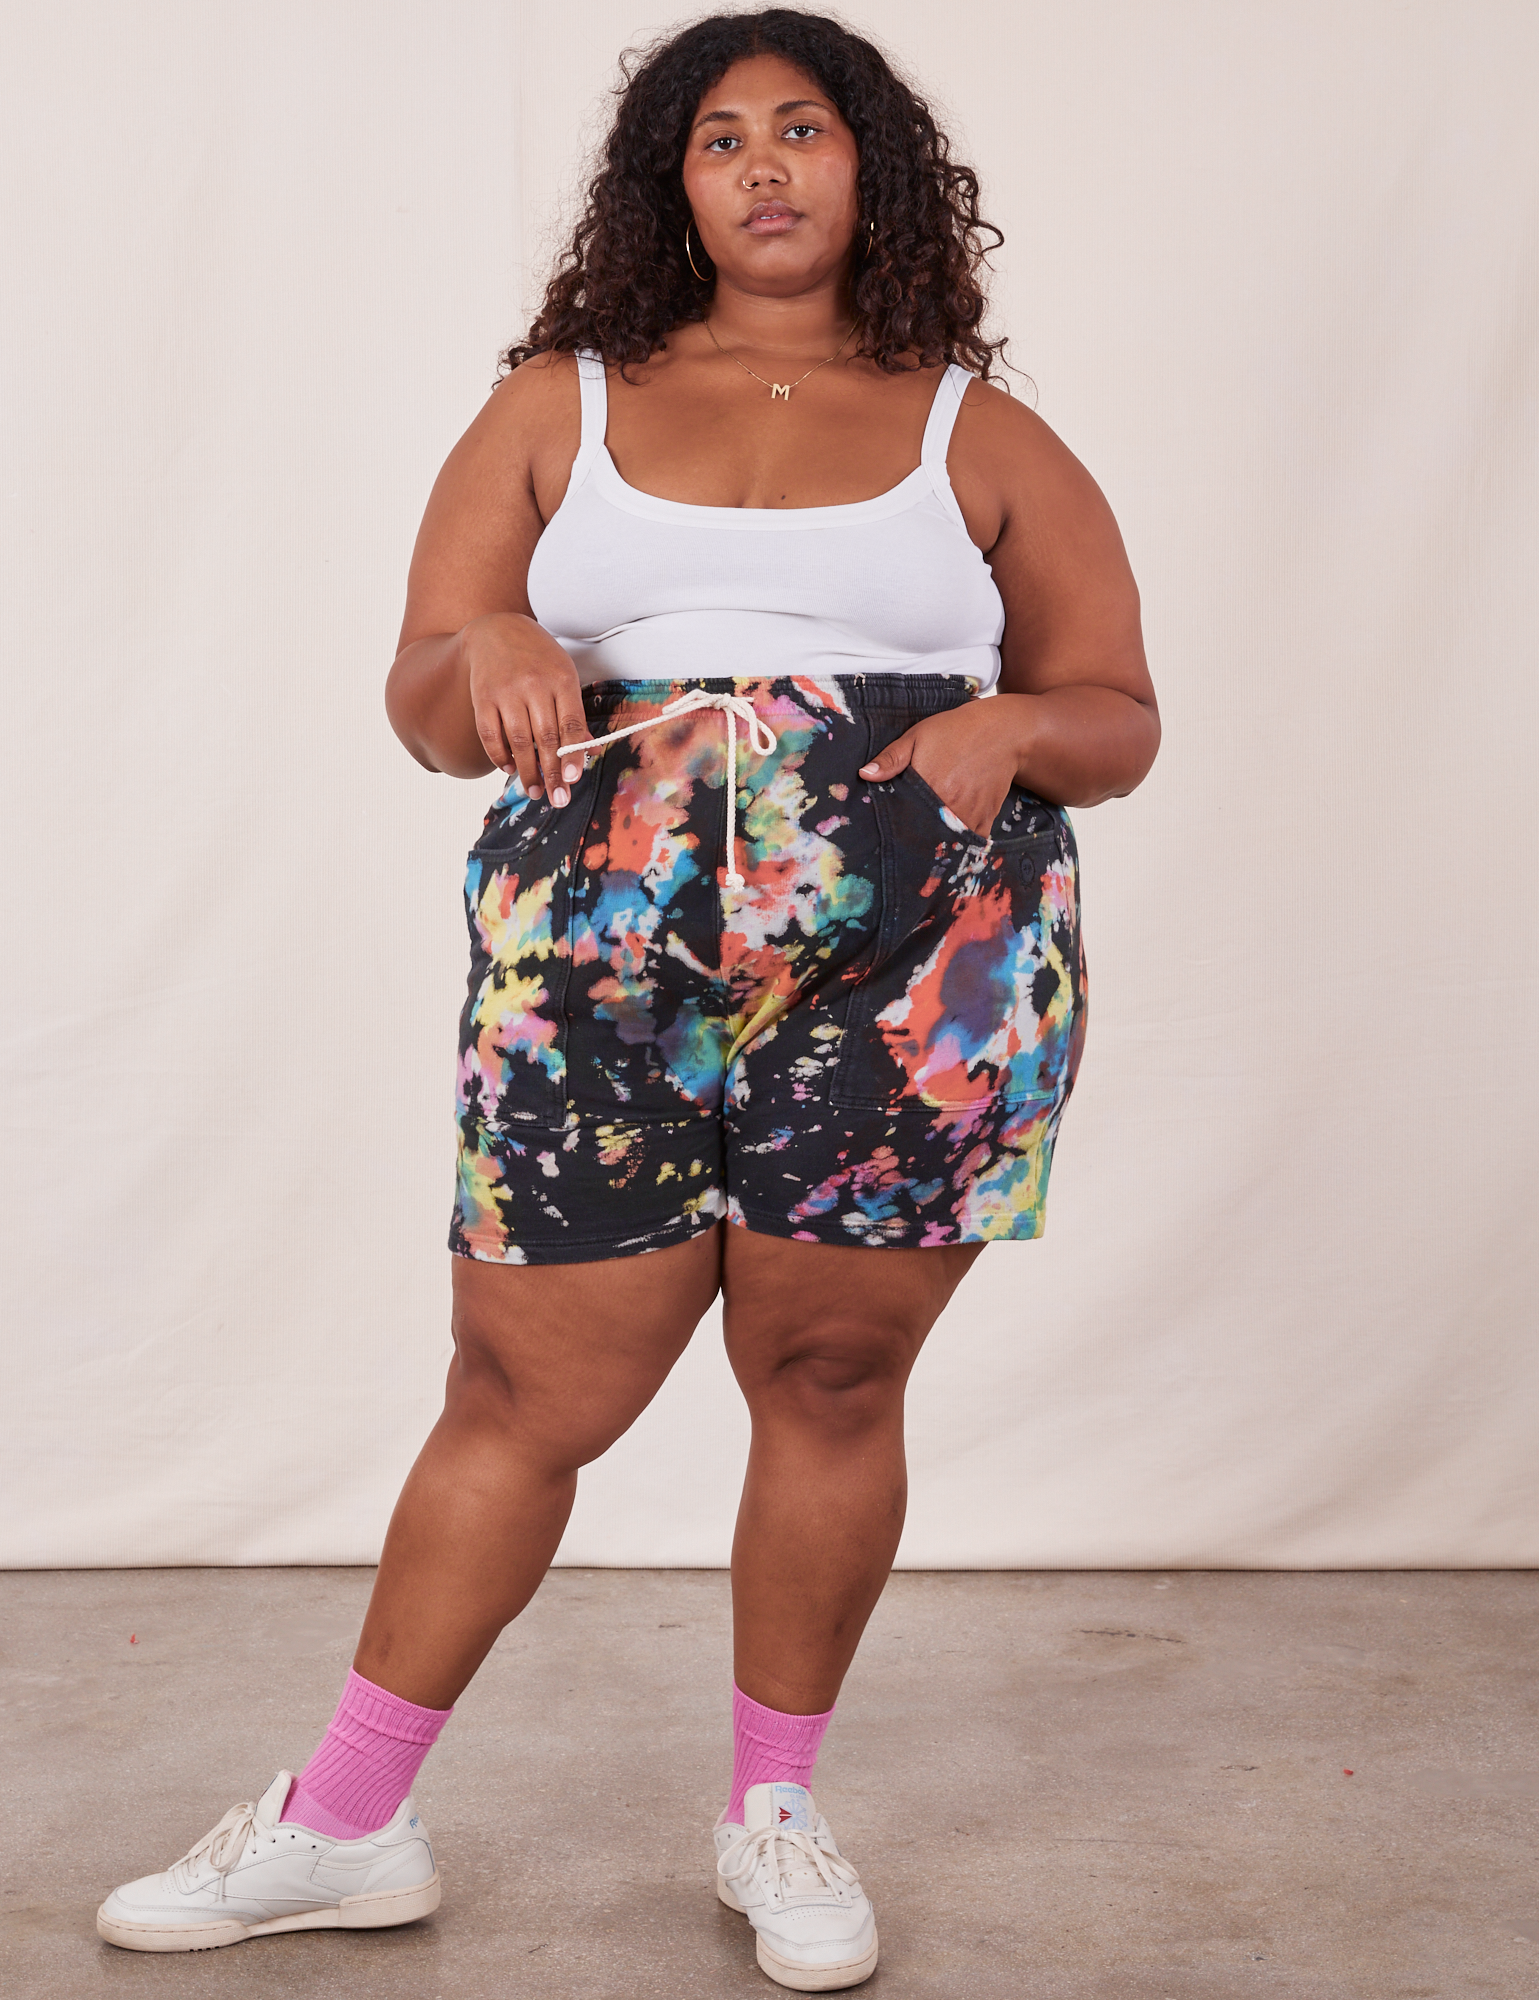 Morgan is 5&#39;5&quot; and wearing 1XL Sweat Shorts in Rainbow Magic Waters paired with vintage off-white Cami